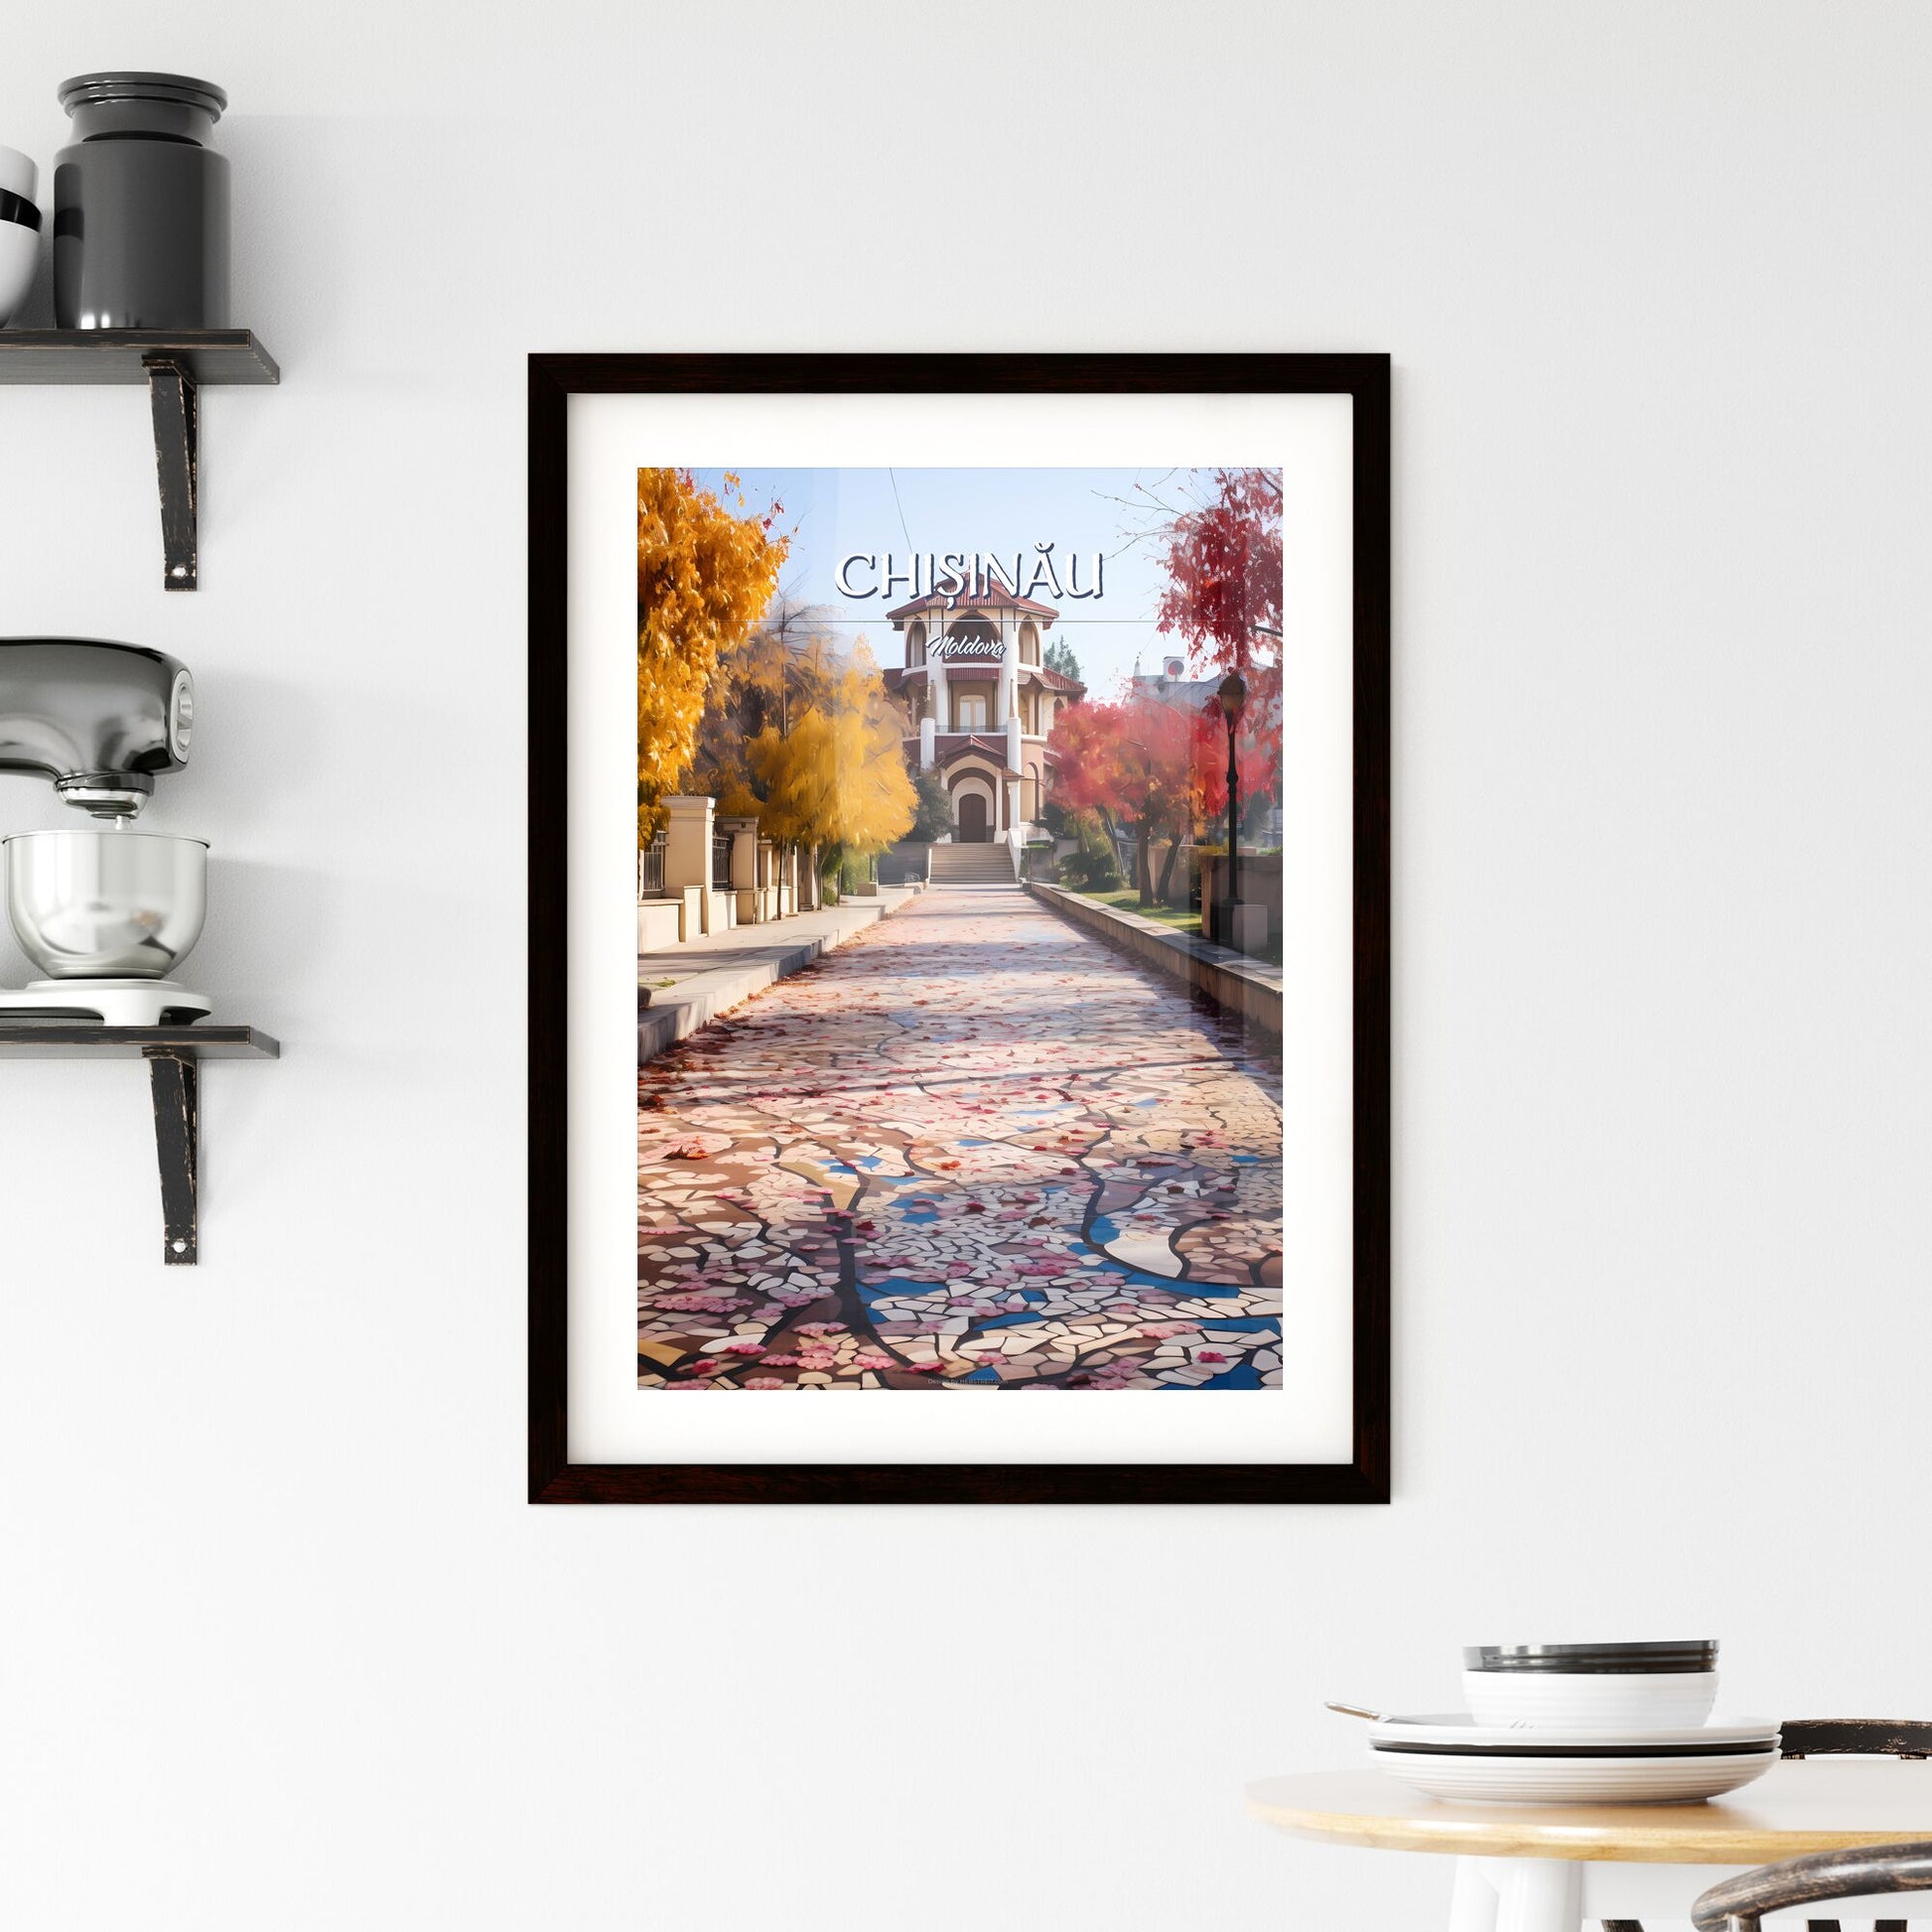 Chișinău, Moldova - Art print of a stone path with trees and a building in the background Default Title